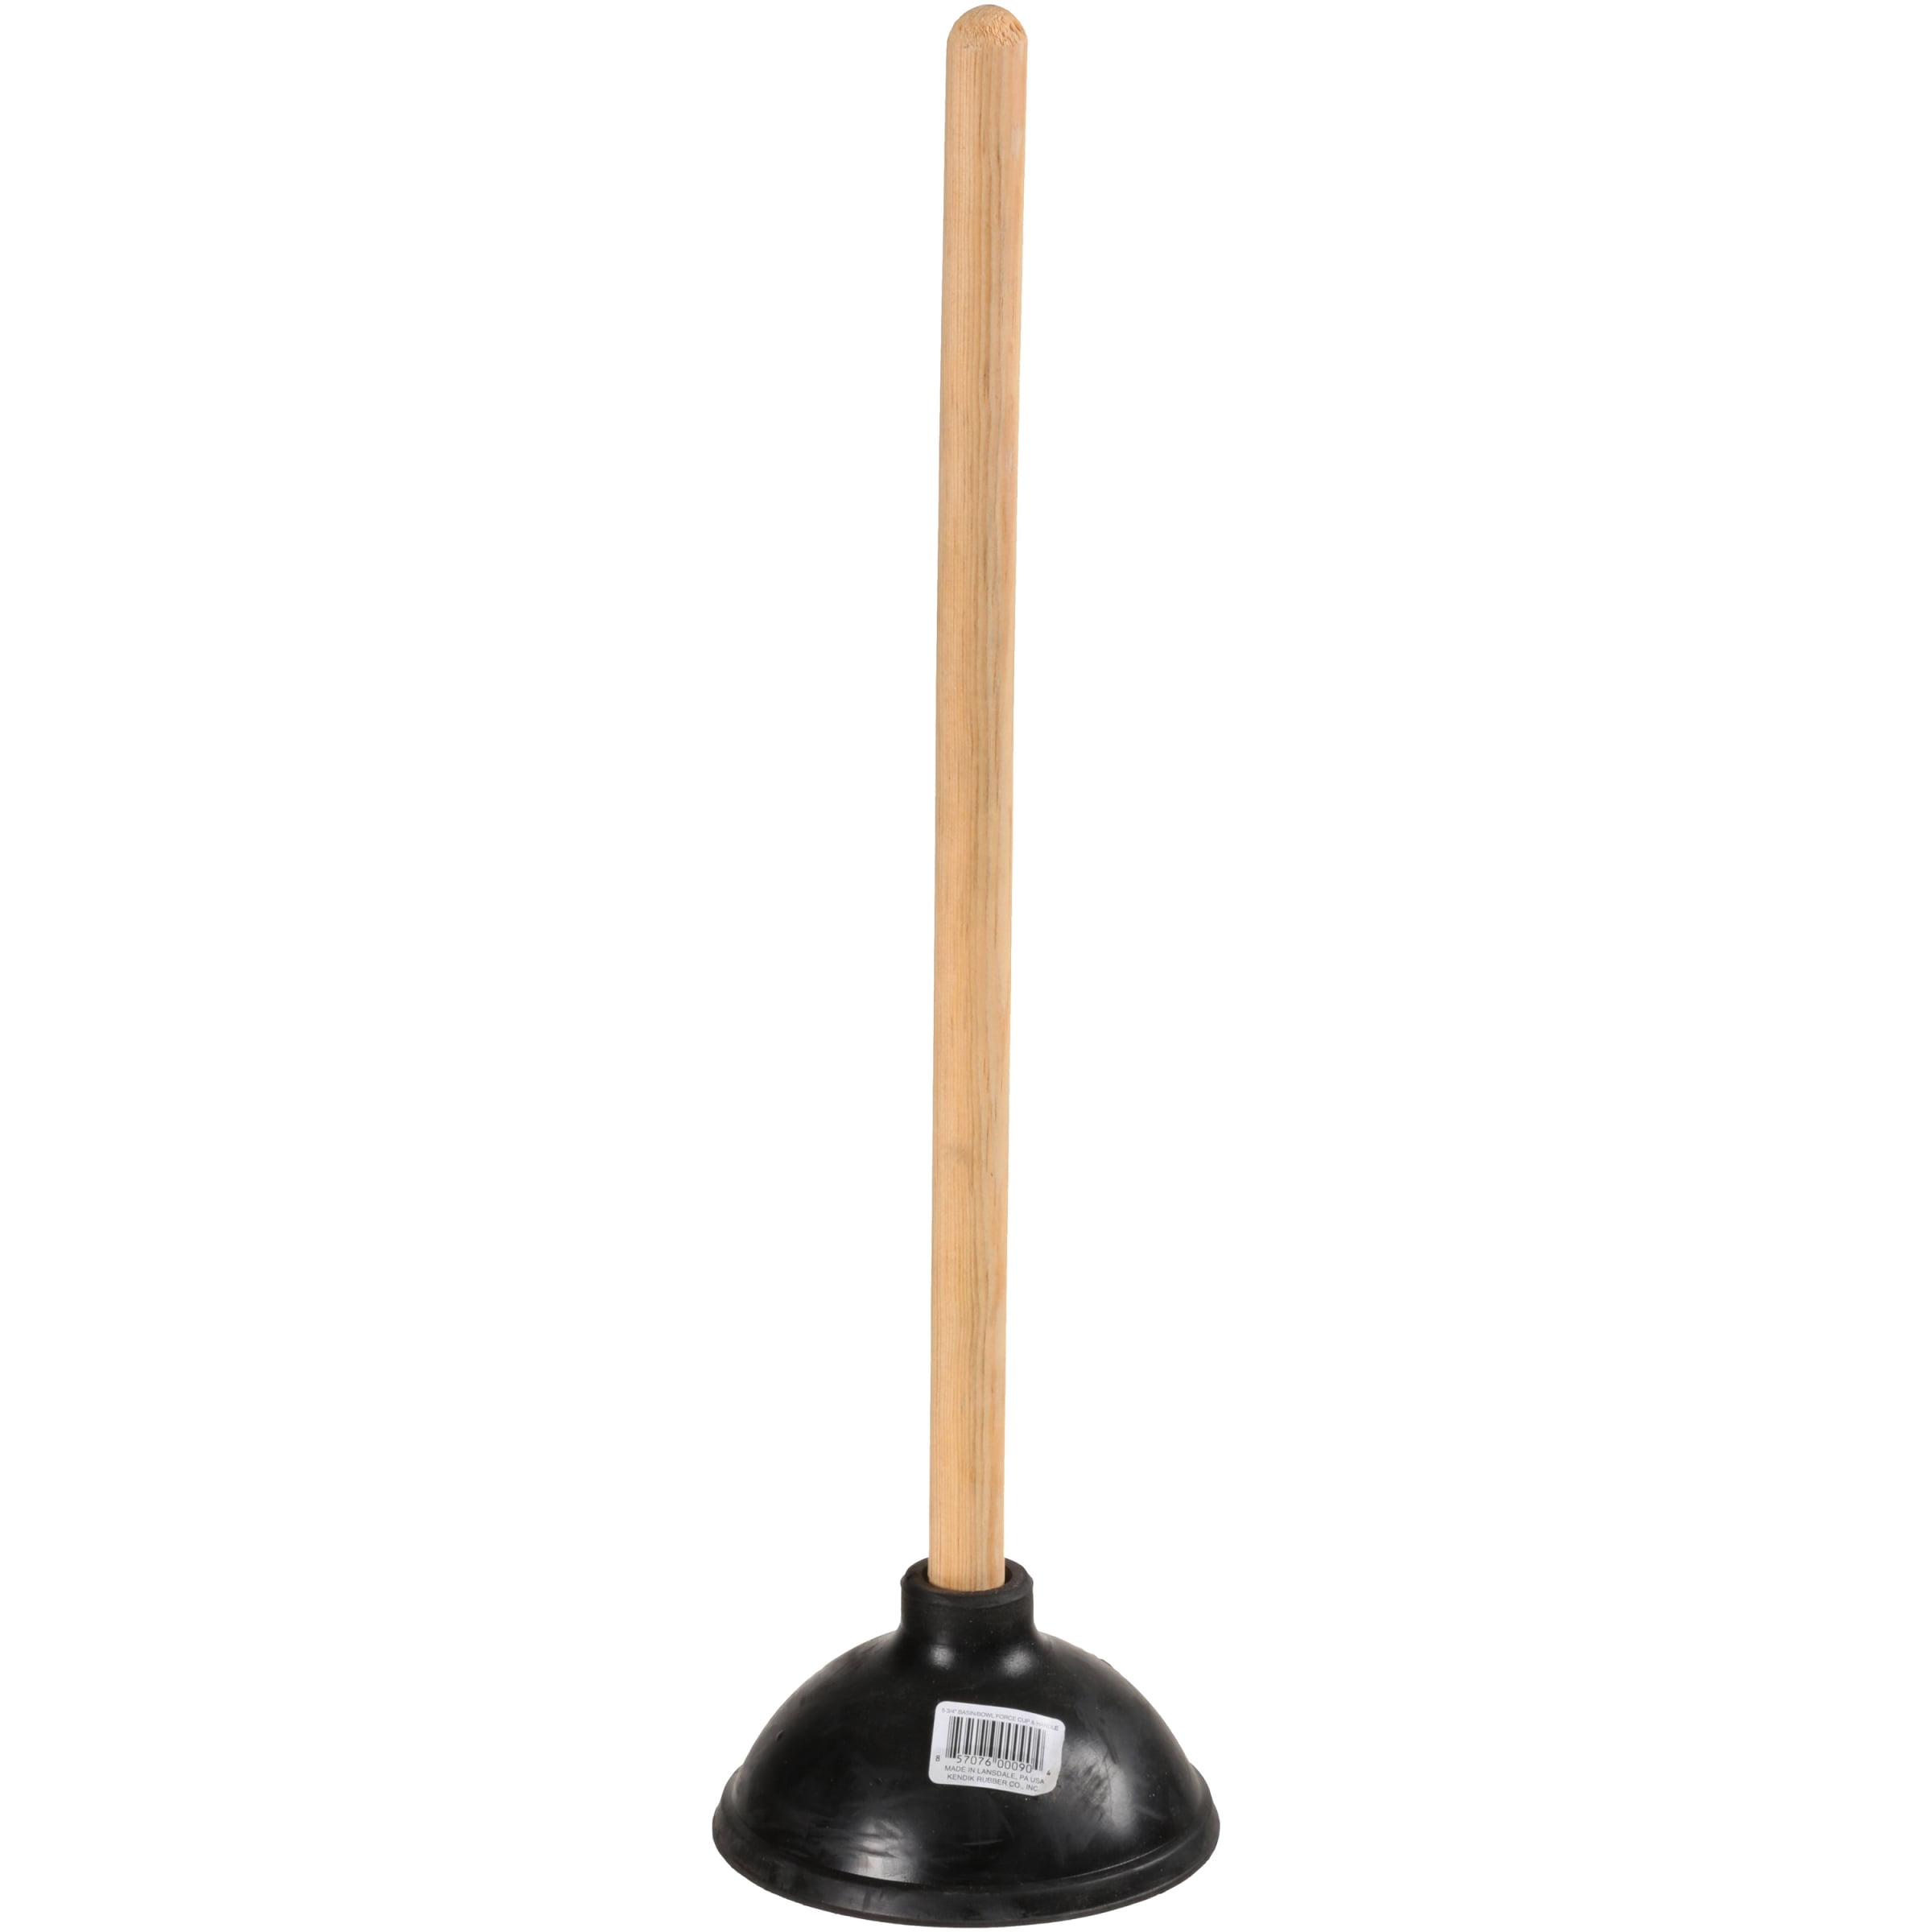 Kendik Rubber Toilet Plunger with Wood Handle. Clears Toilets, Sinks, Drains.